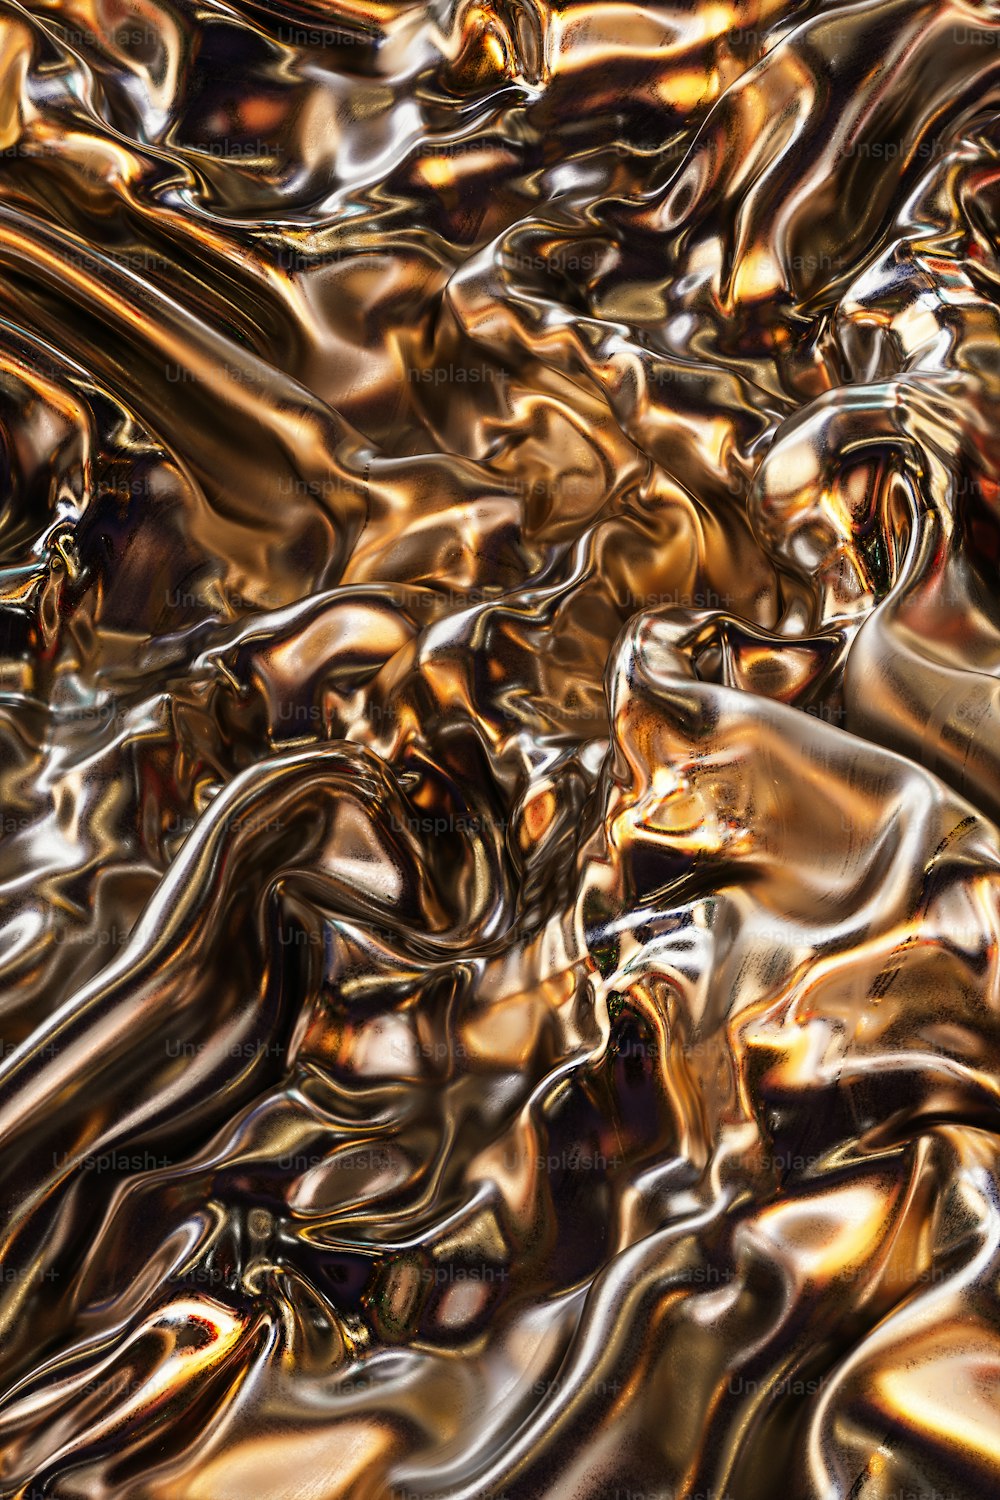 a close up view of a shiny surface